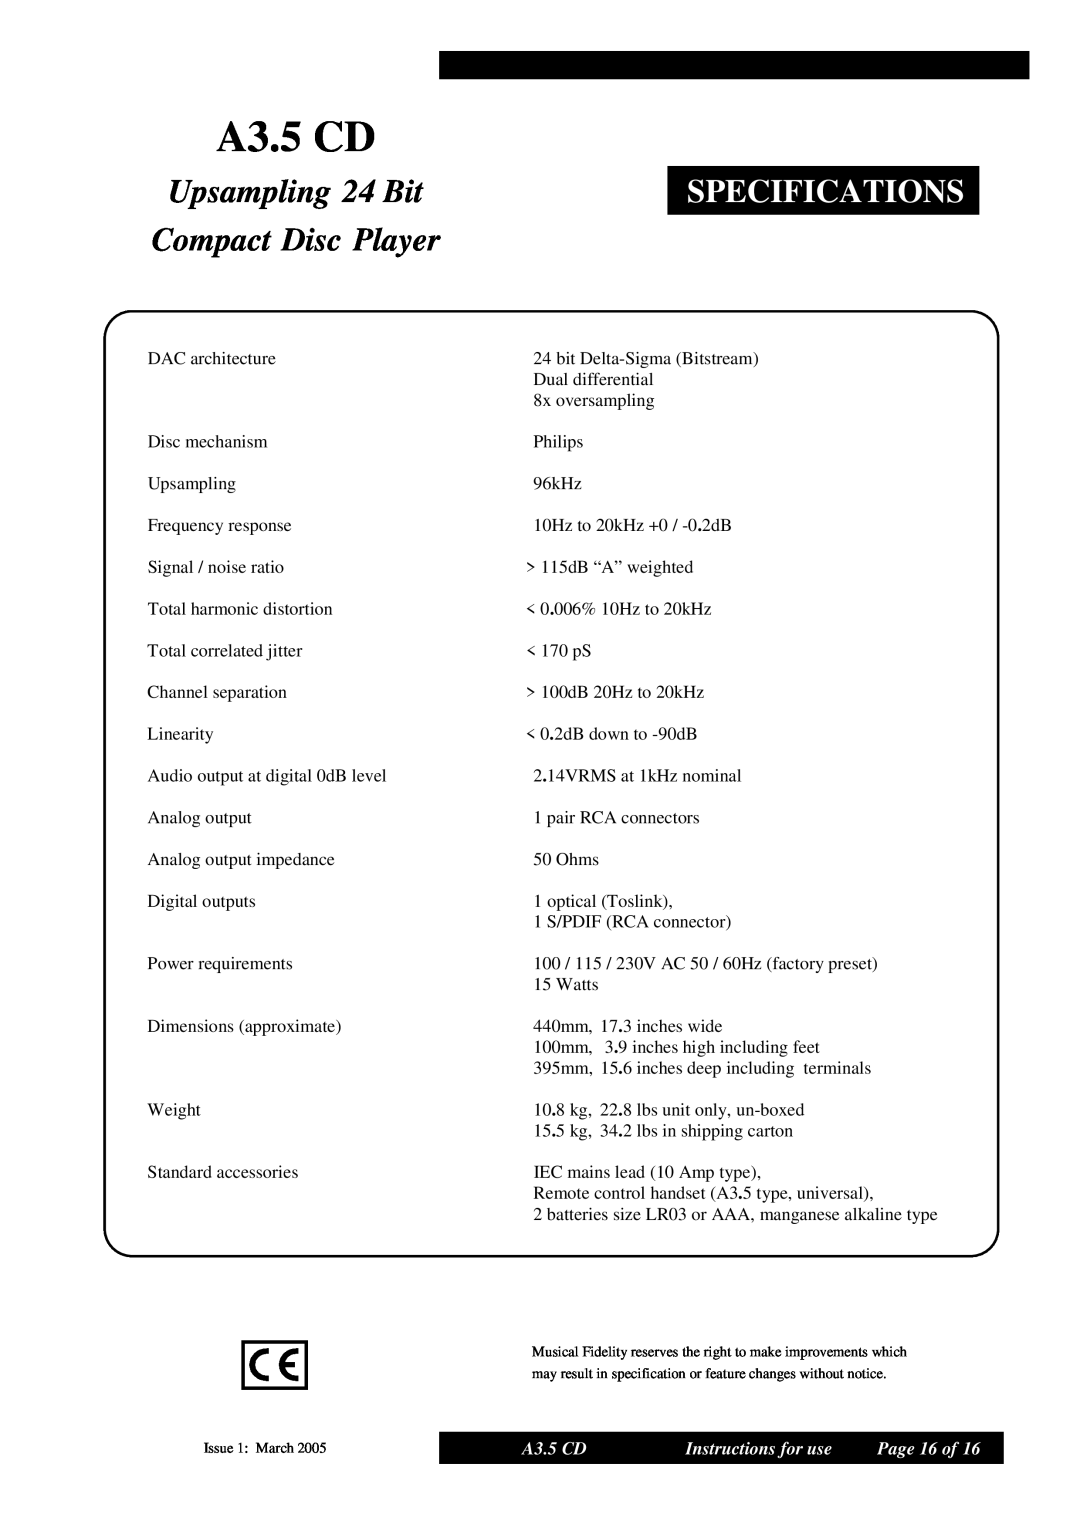 Musical Fidelity Upsampling 24 Bit, Compact Disc Player, A3.5 CD, Specifications, Instructions for use, Page 16 of 